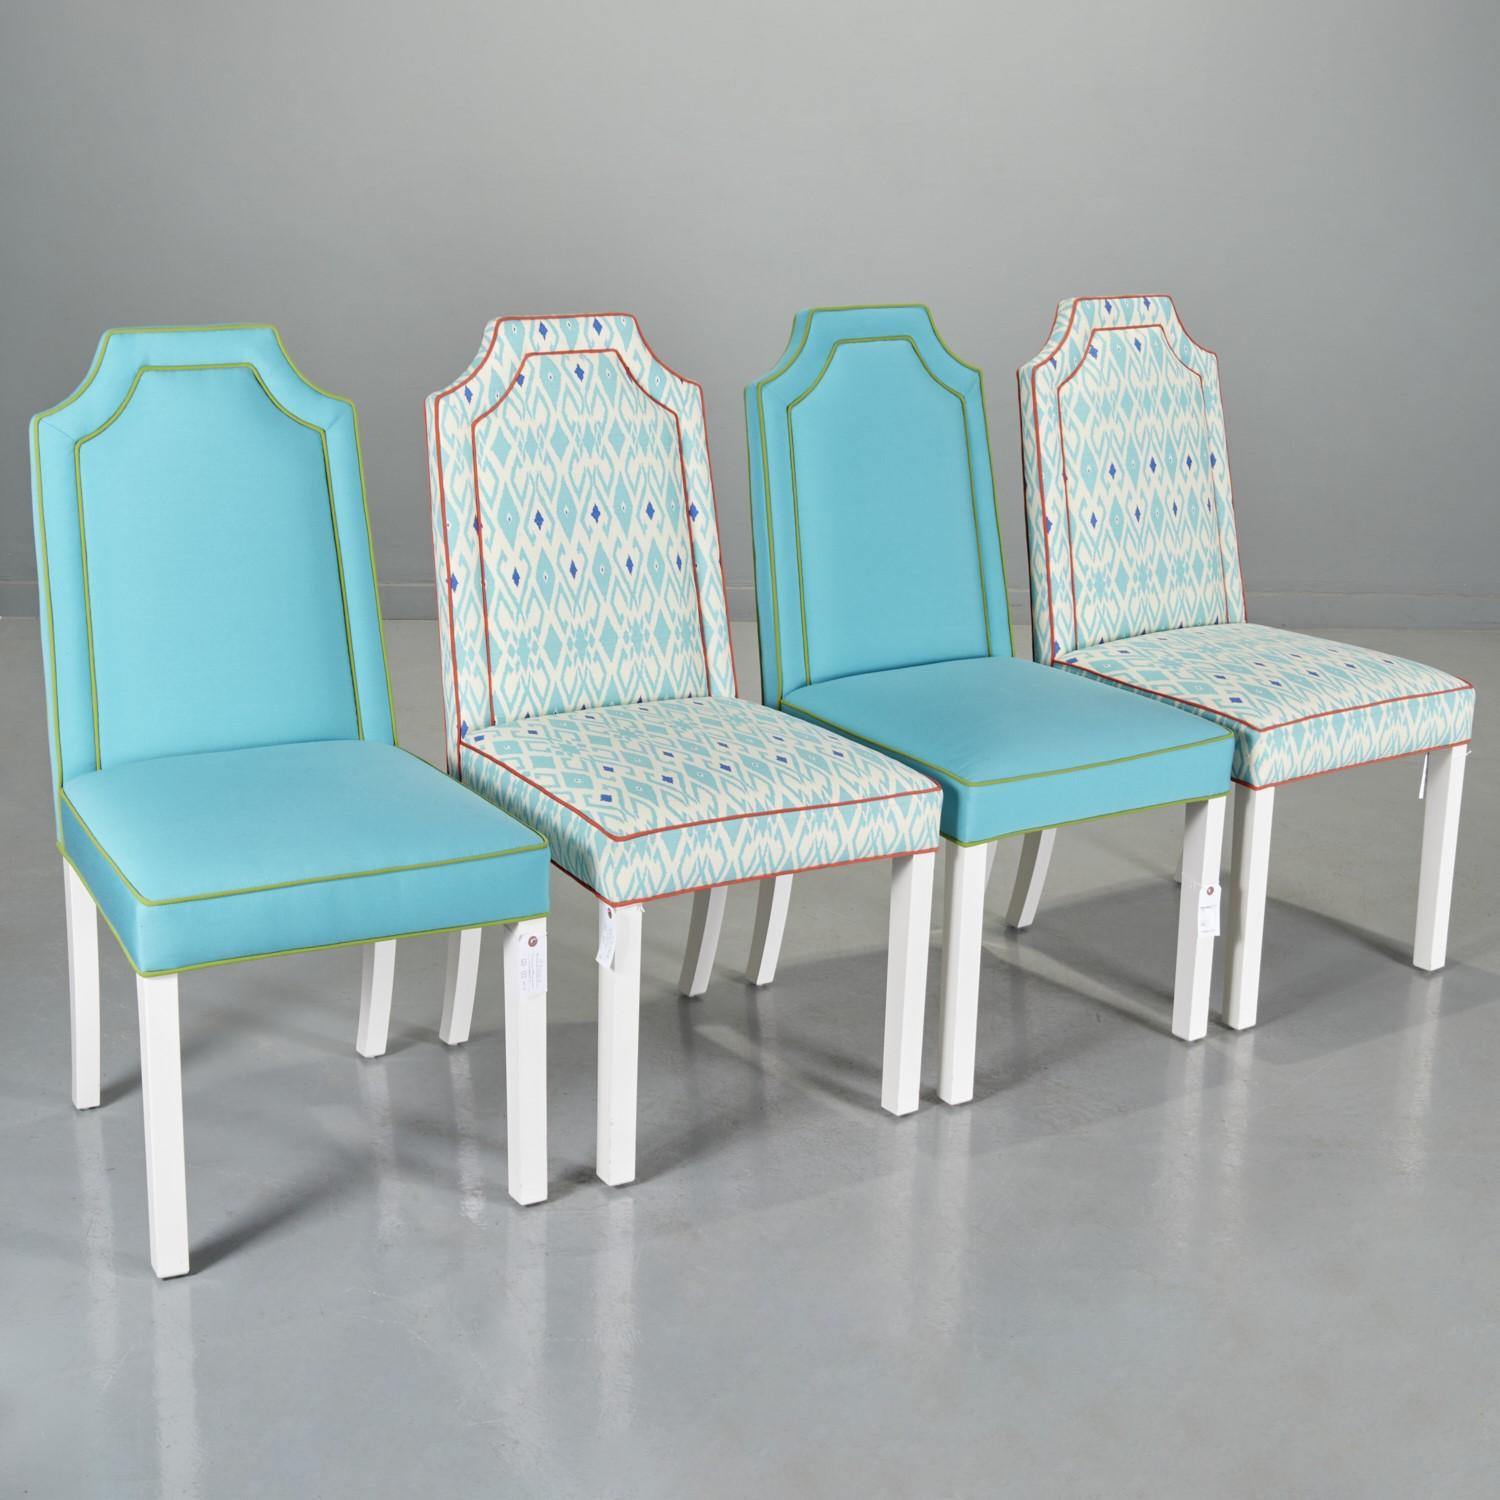 Contemporary 21st C. 4 Colorful Designer Parsons Dining Chairs with Contrasting Piping For Sale